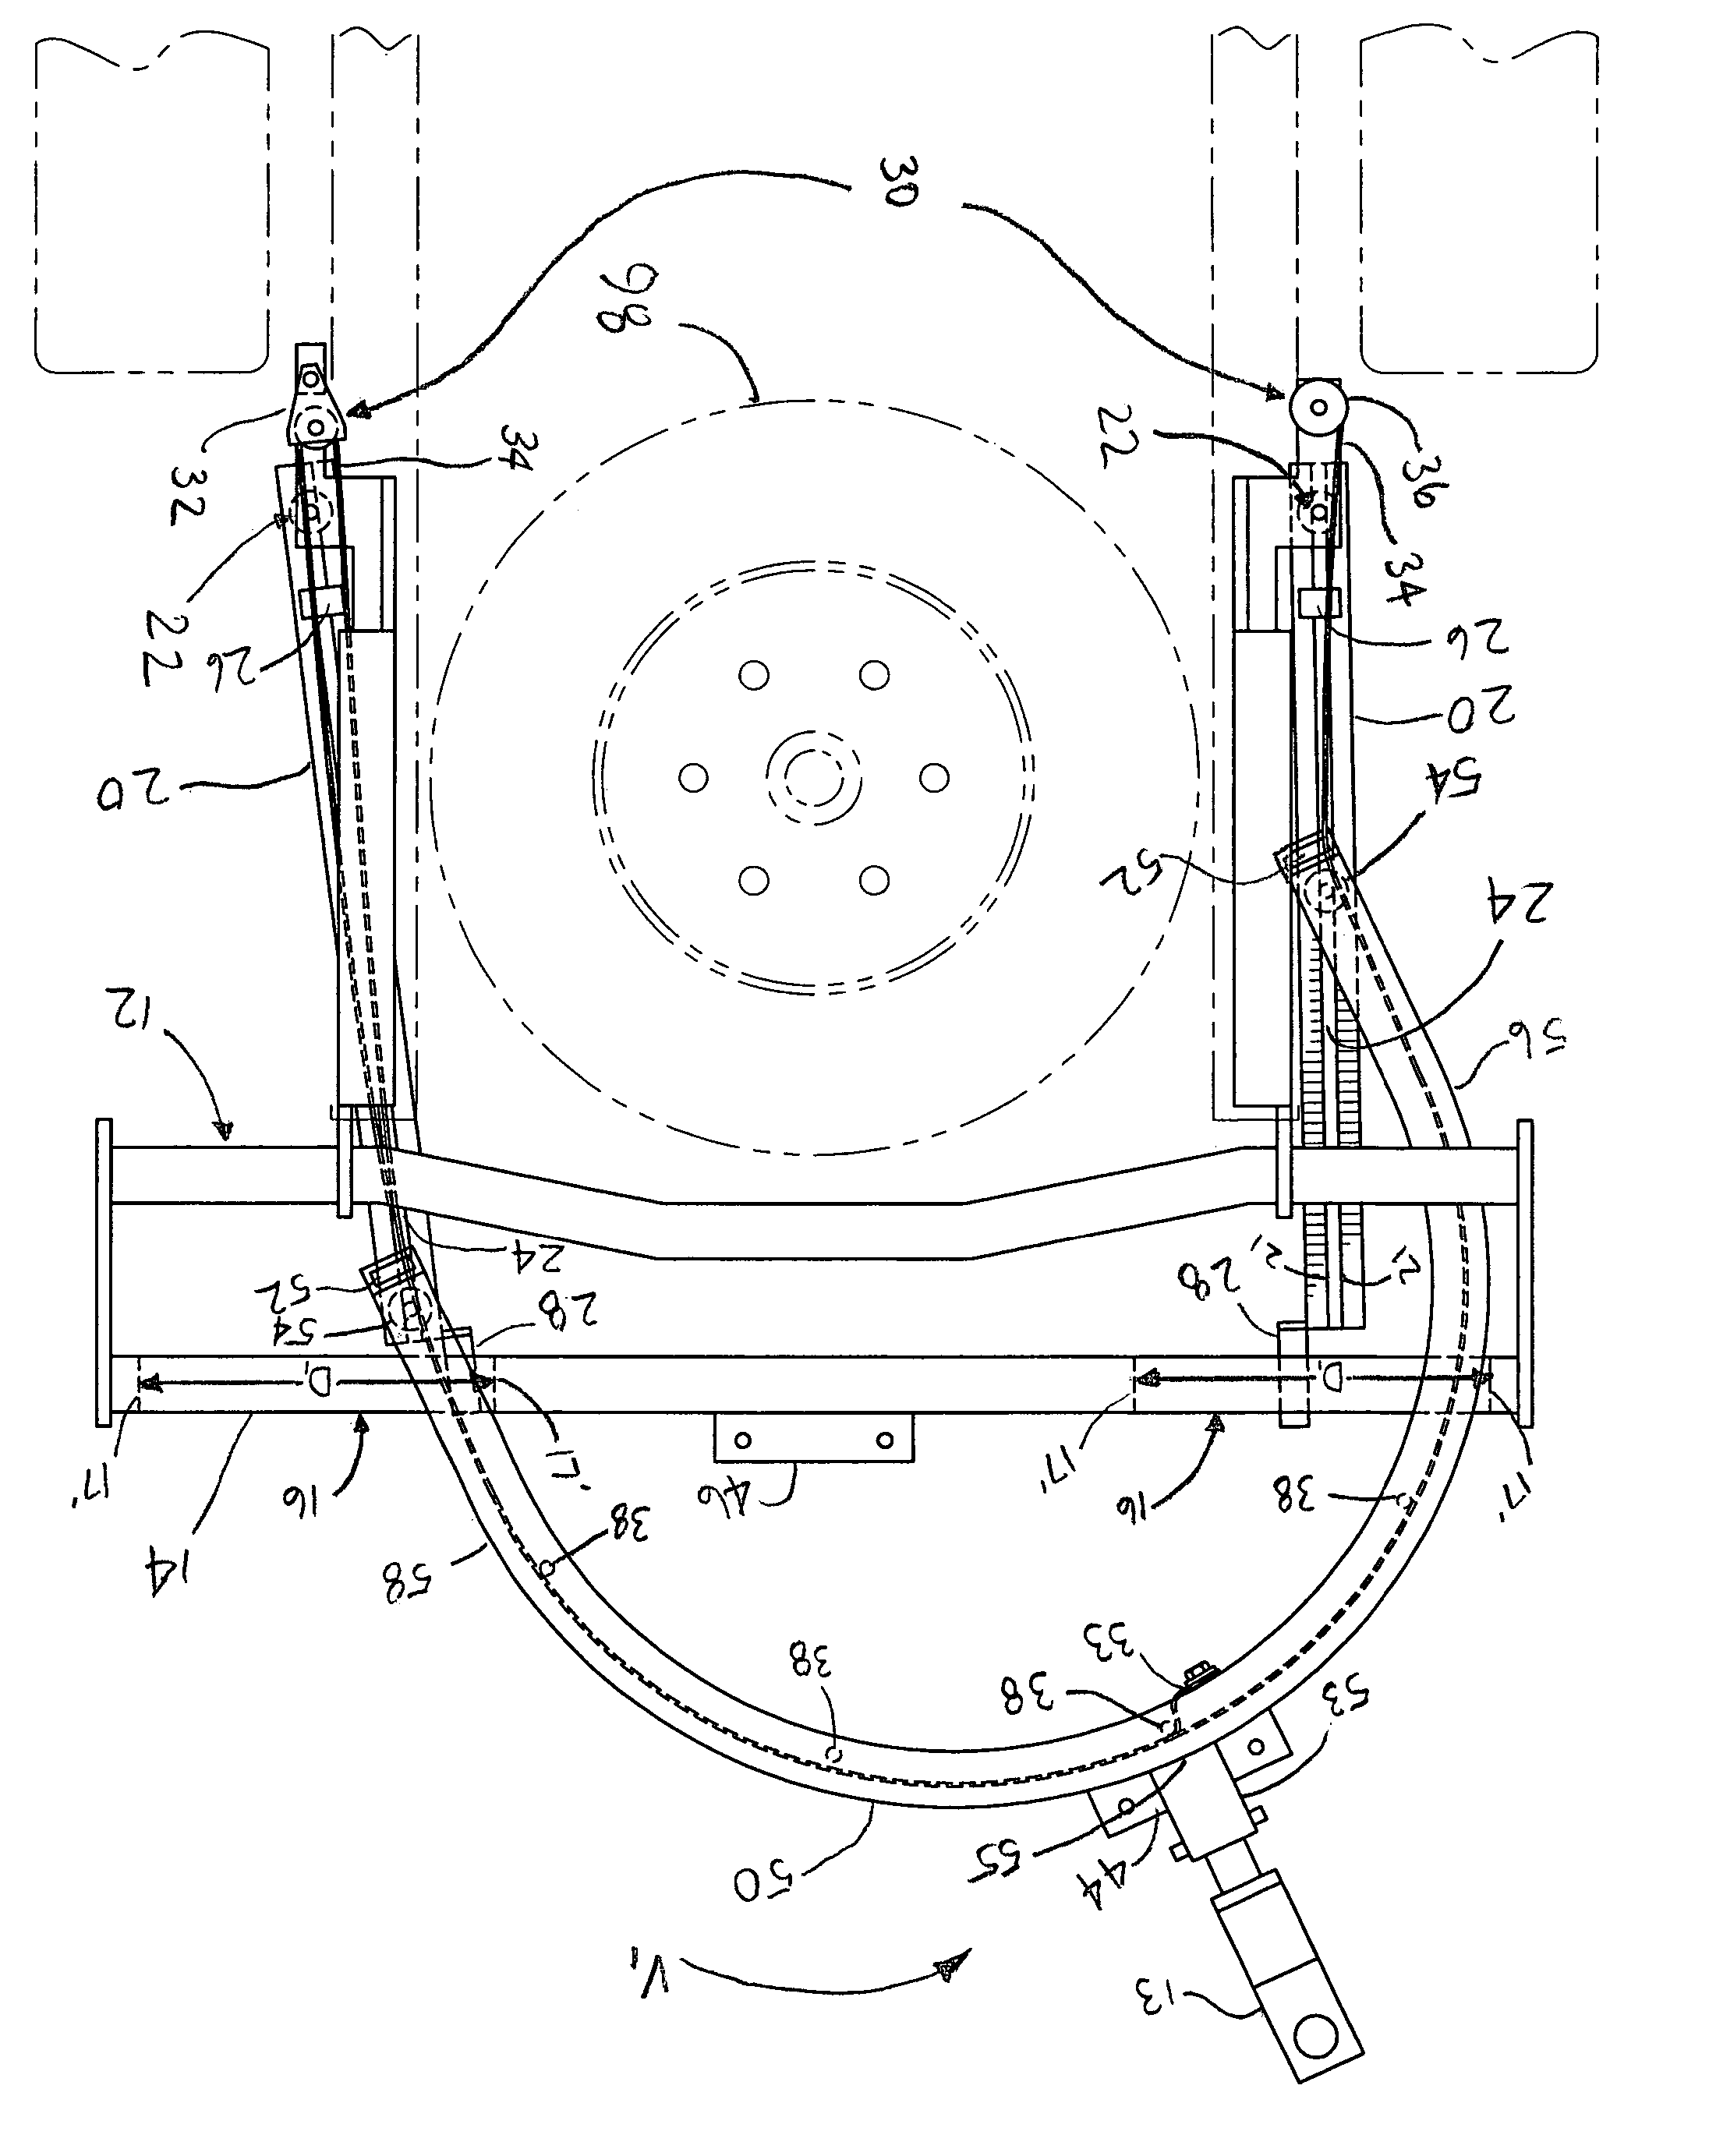 Towing device used to facilitate connection of a towing vehicle to a towed vehicle